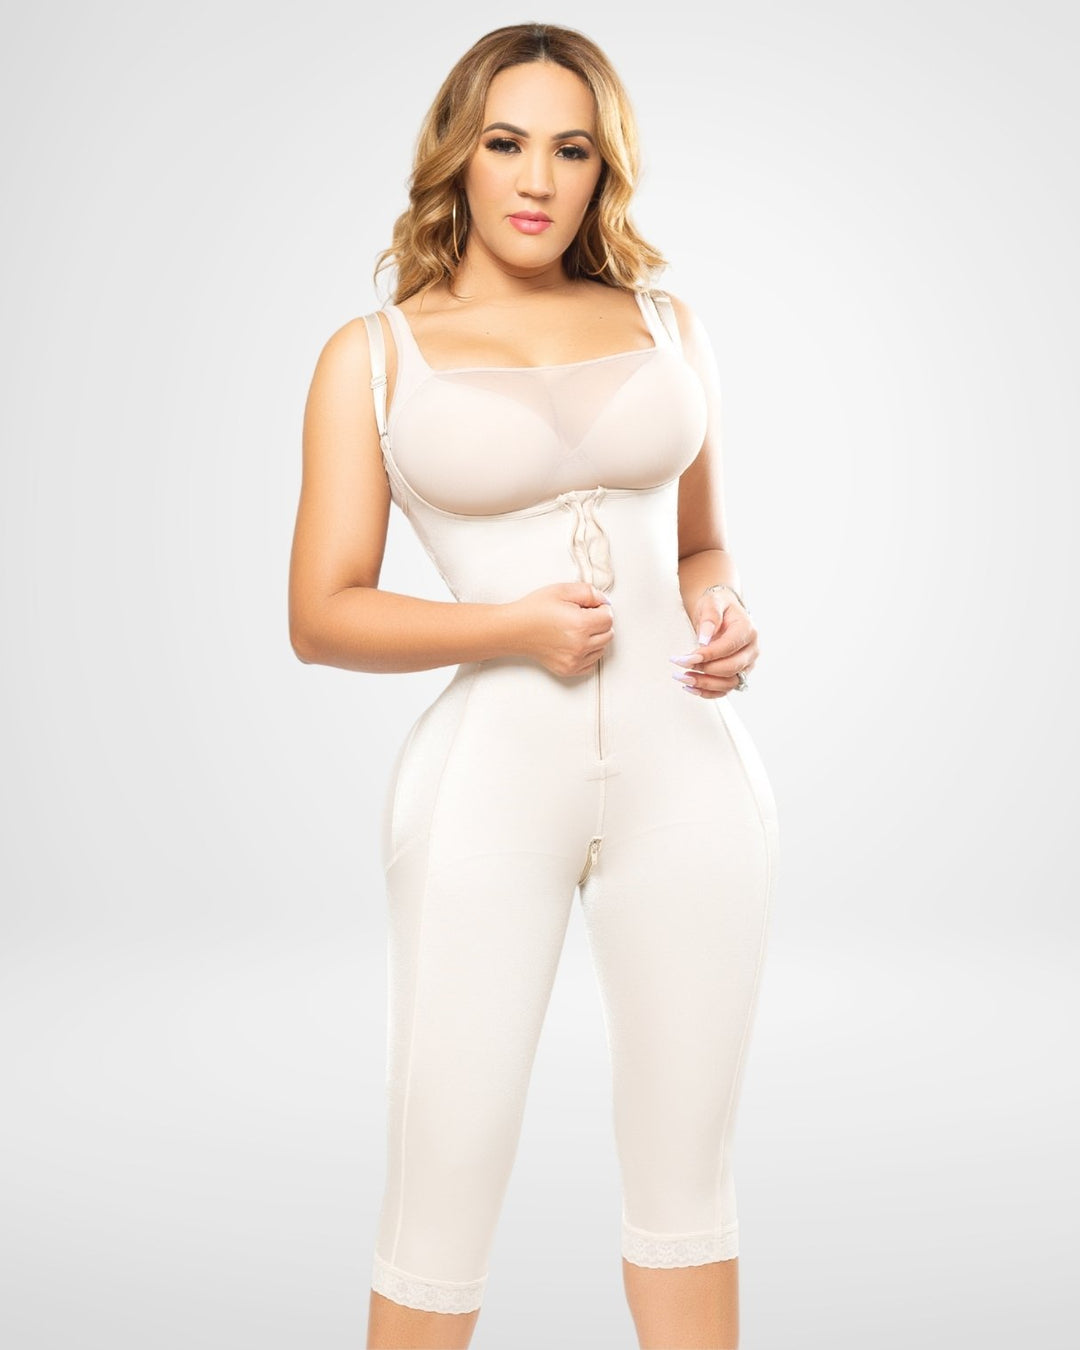 Modern Sensation 530- Long Girdle Without Clasp or Closures